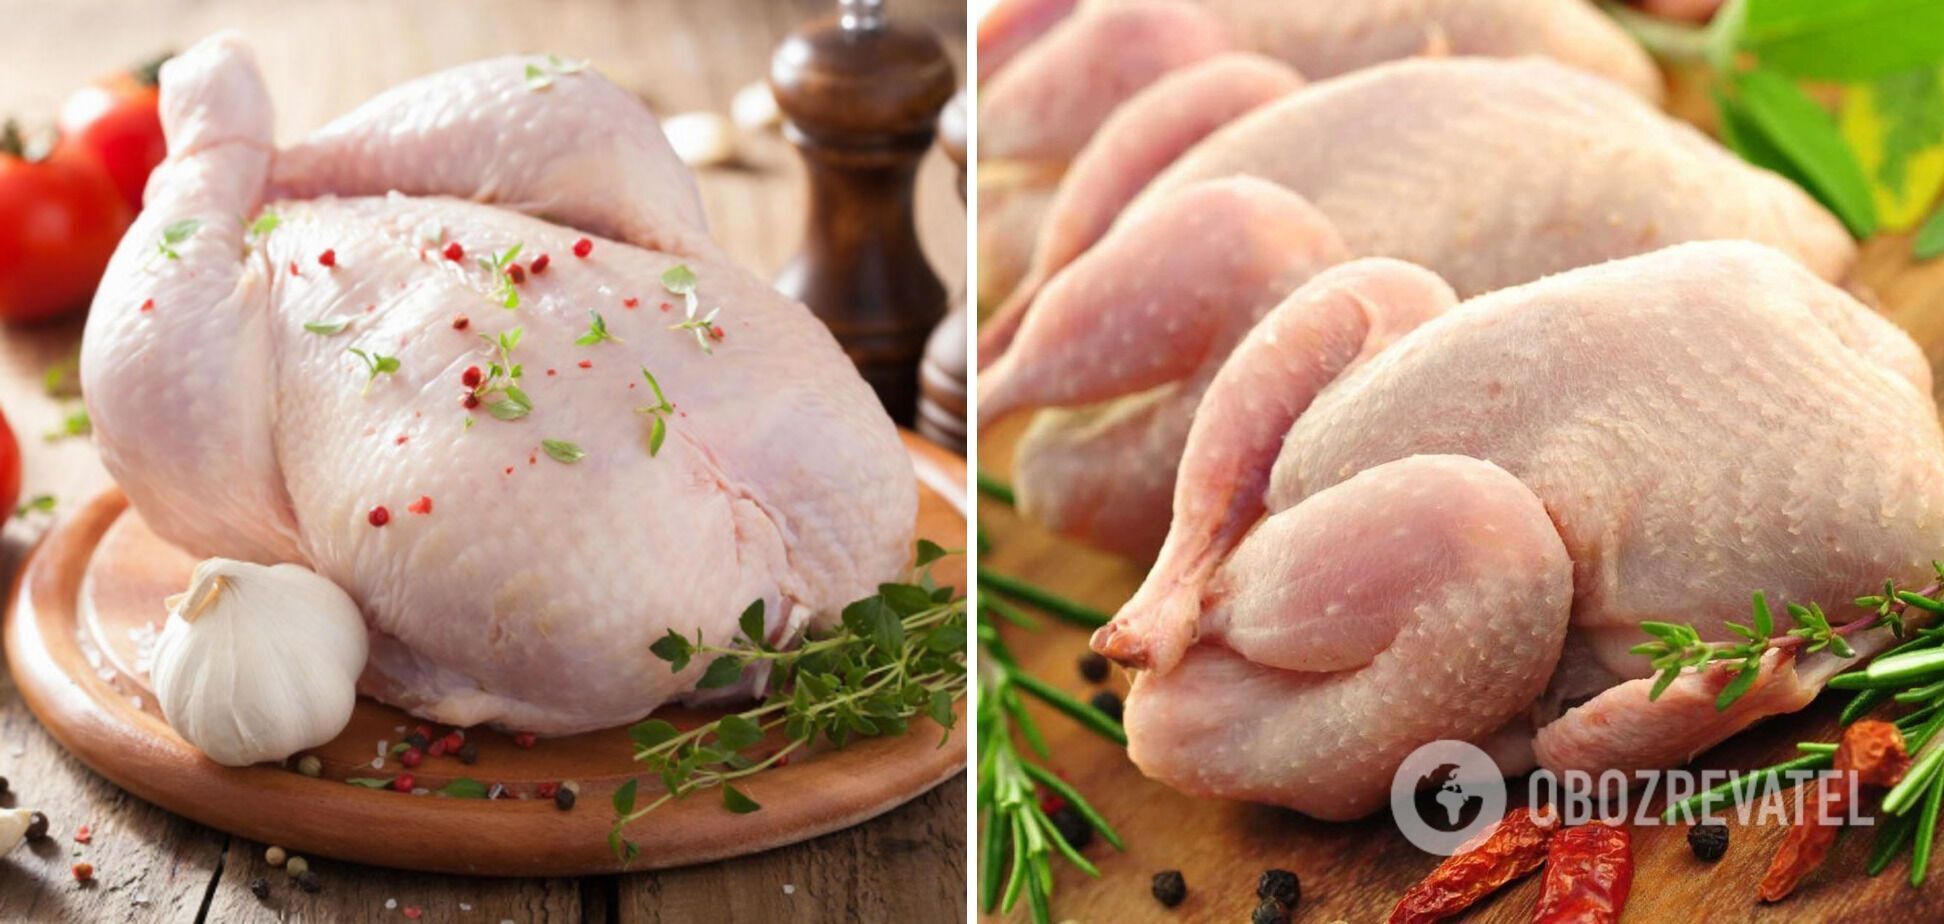 How to prepare chicken for cooking